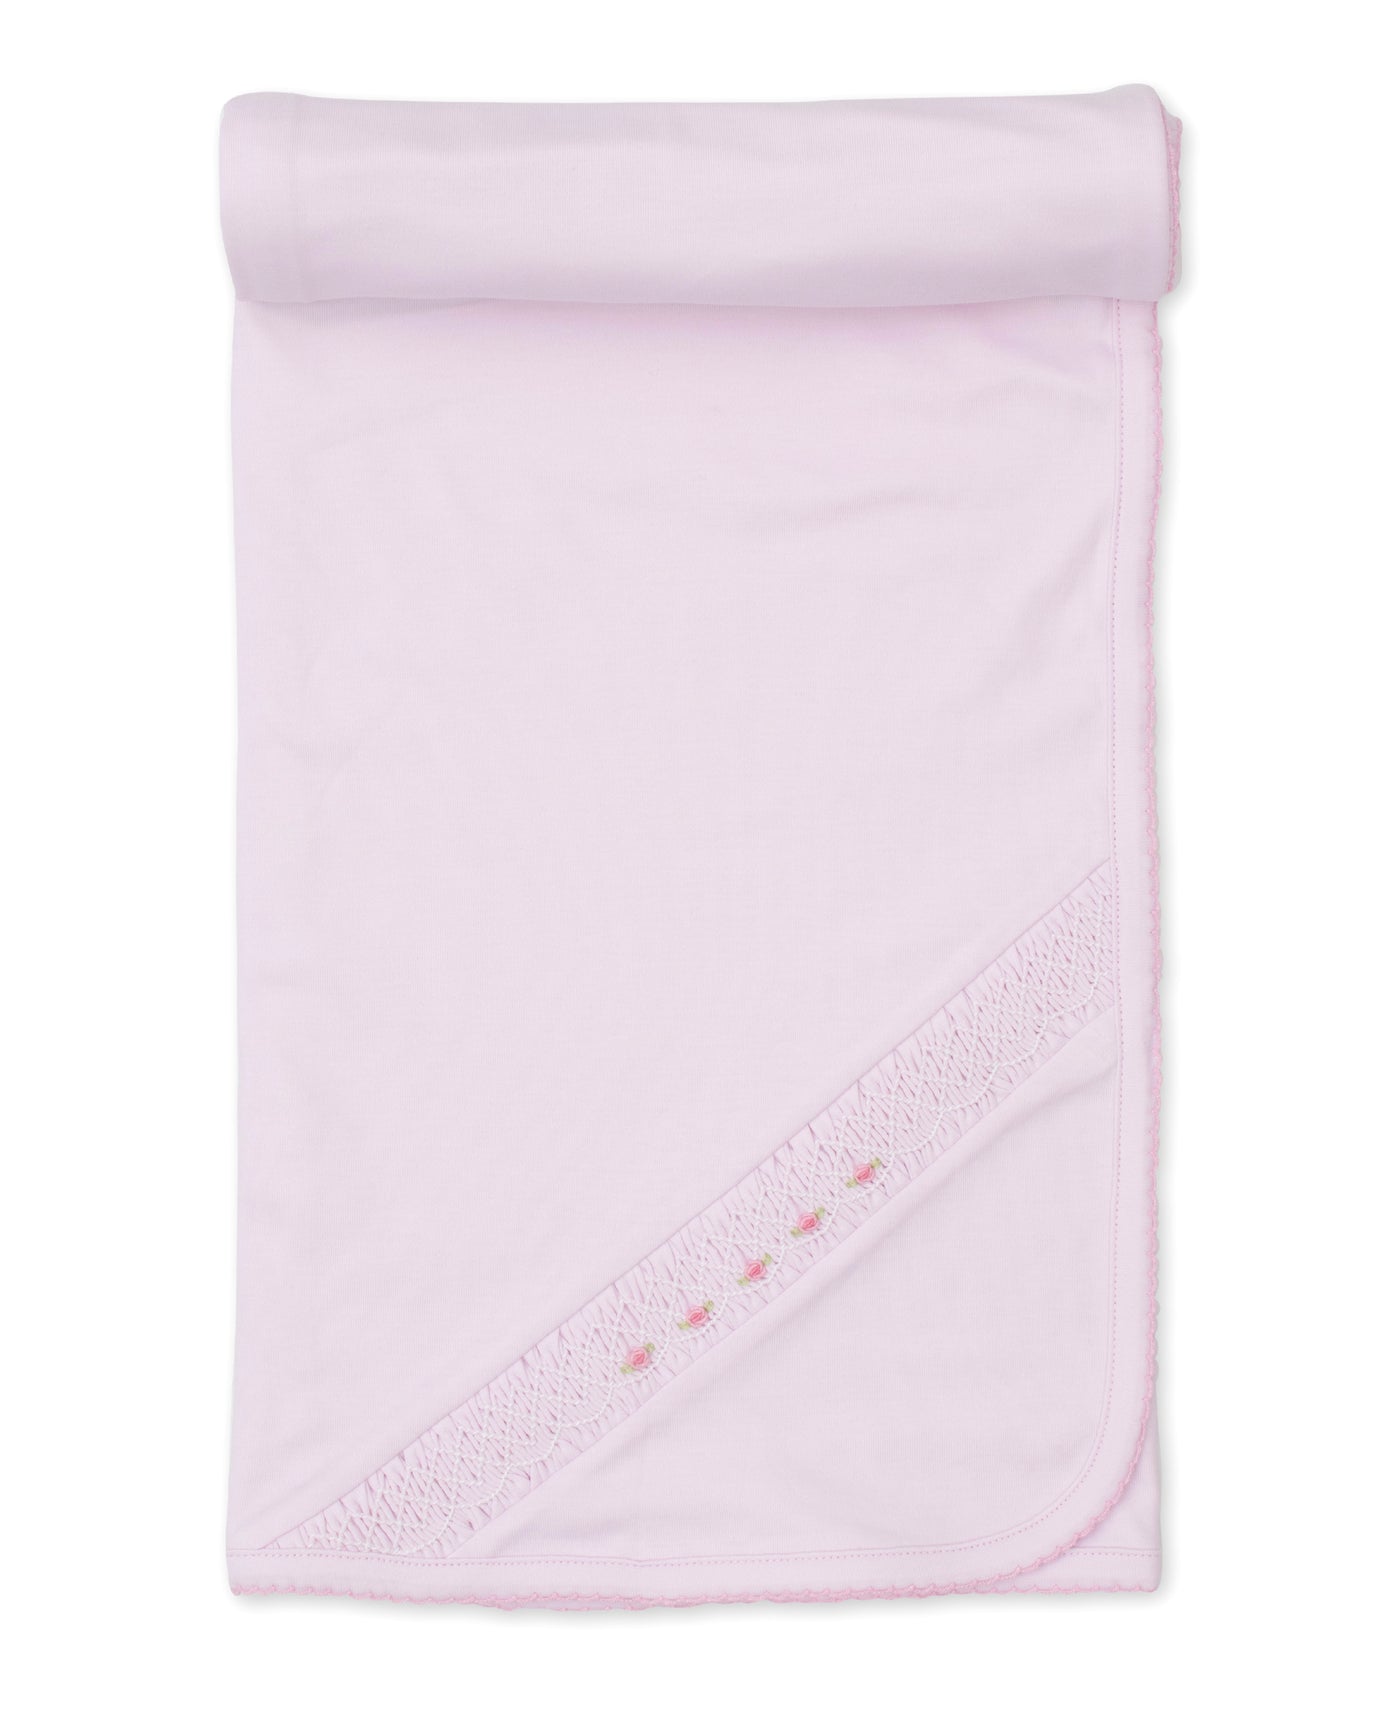 CLB Summer Blanket with Hand Smocking (2 Colors Available) - Breckenridge Baby